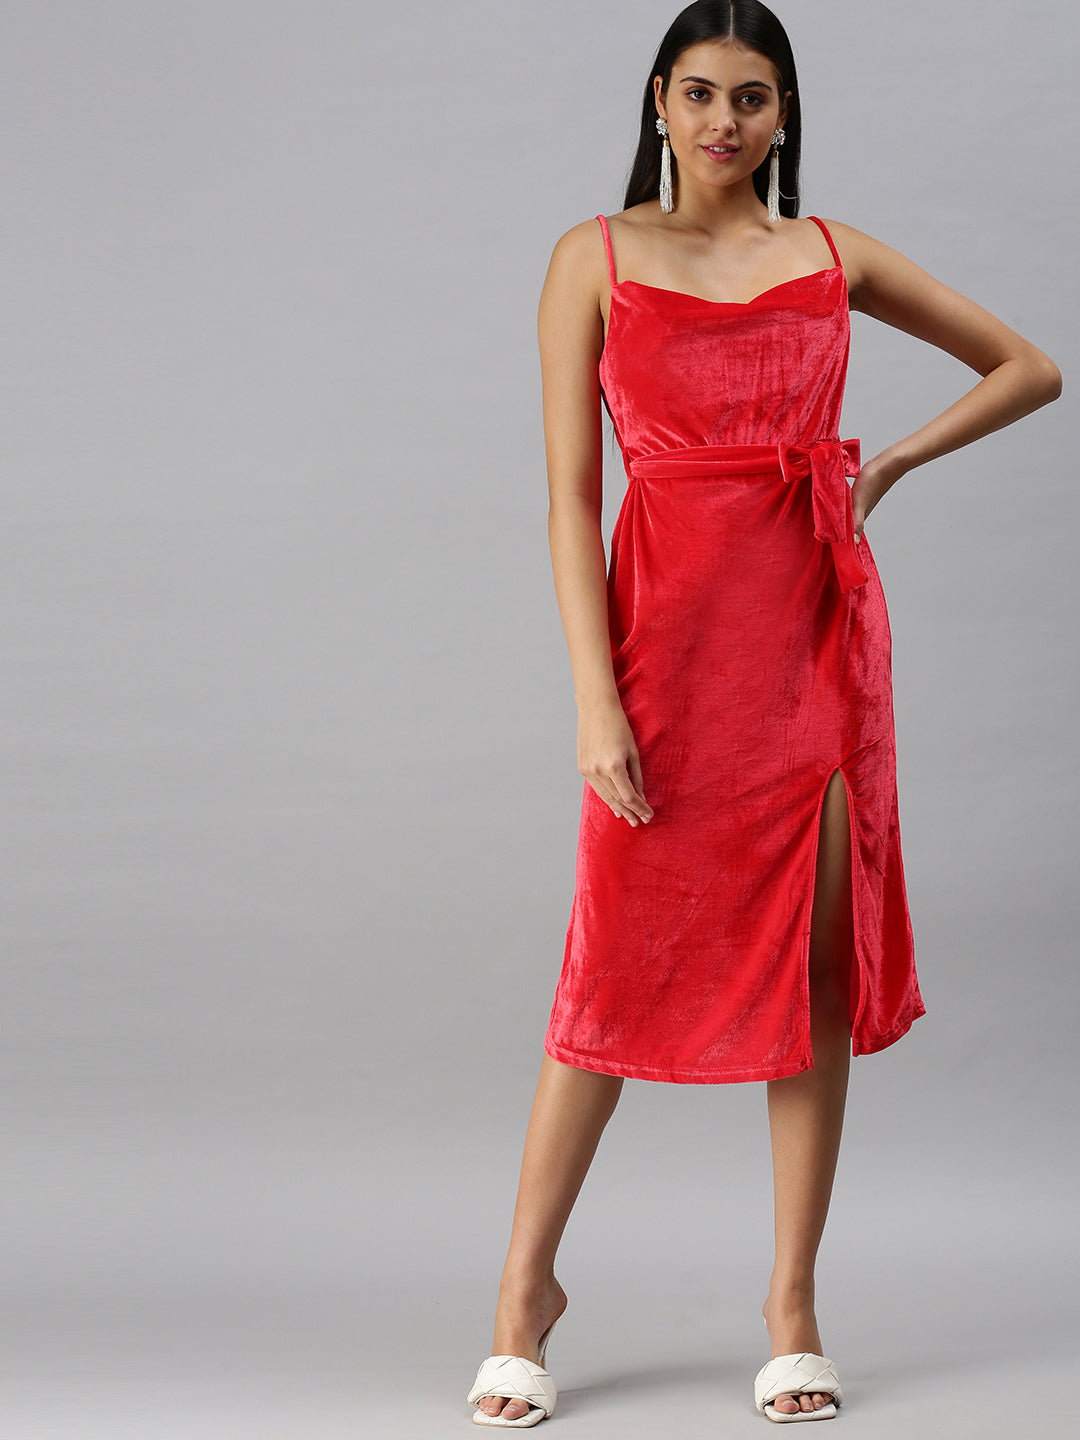 Women's A-Line Cowl Red Solid Dress